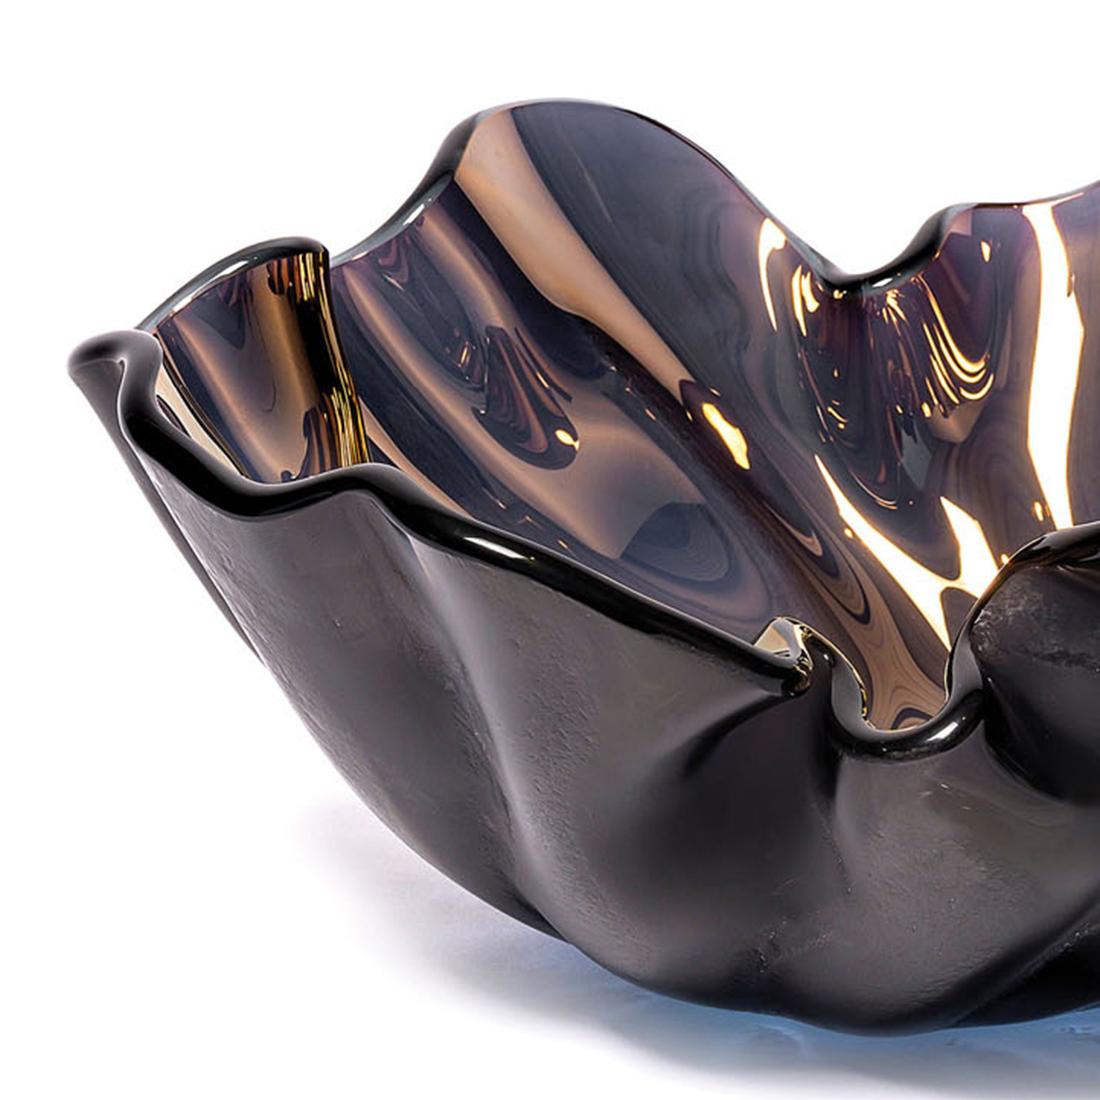 Bowl petal bronze shiny glass all in blown glass with
bronze shiny finish inside, with blackened glass finish
outside. Hand-crafted piece, each piece is unique.